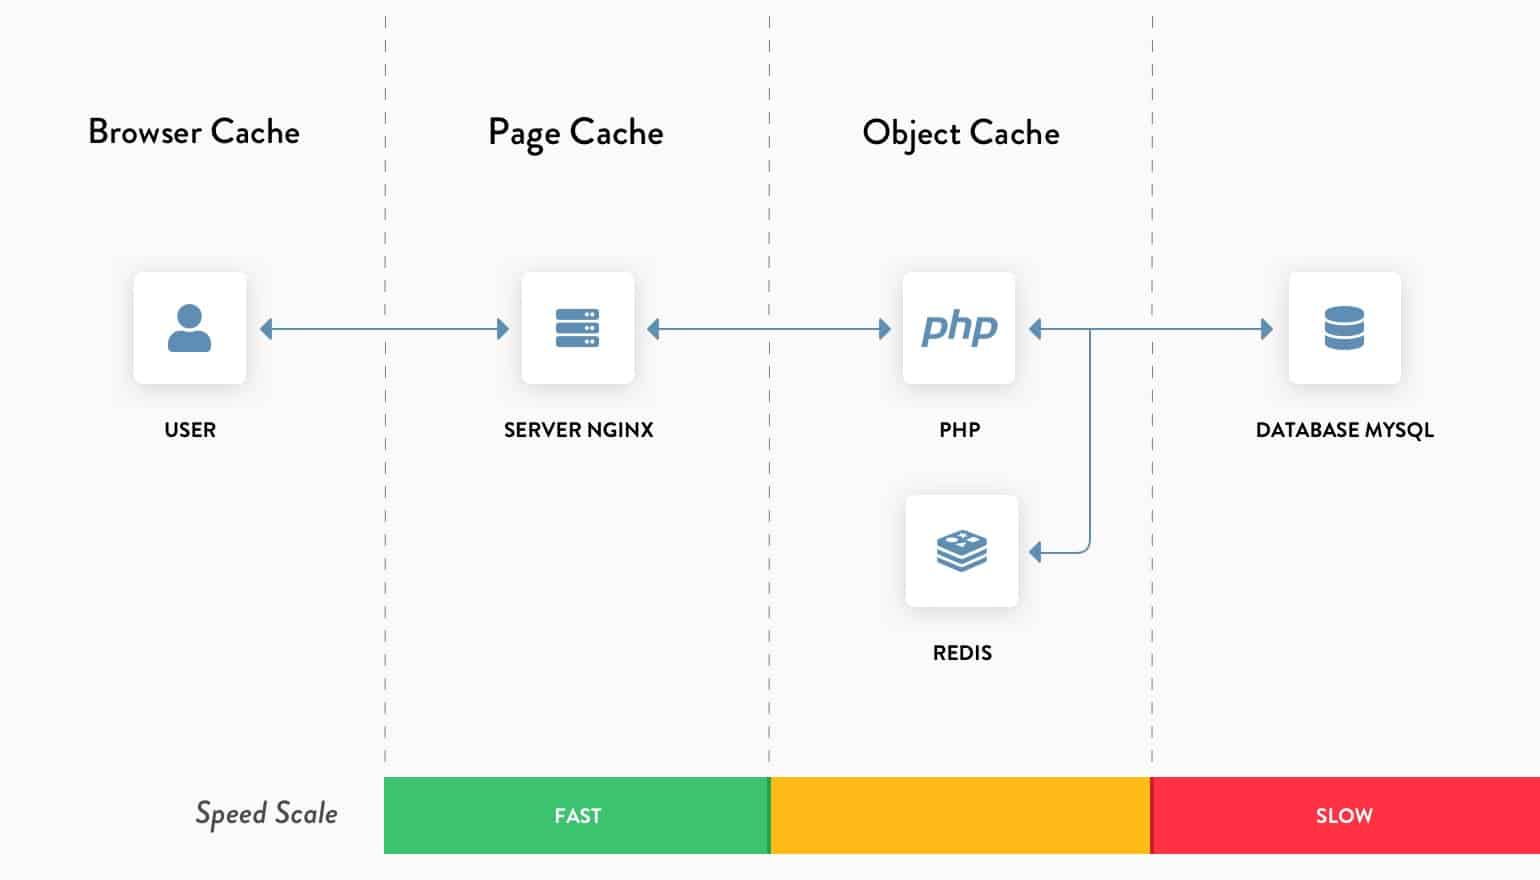 Object Cache